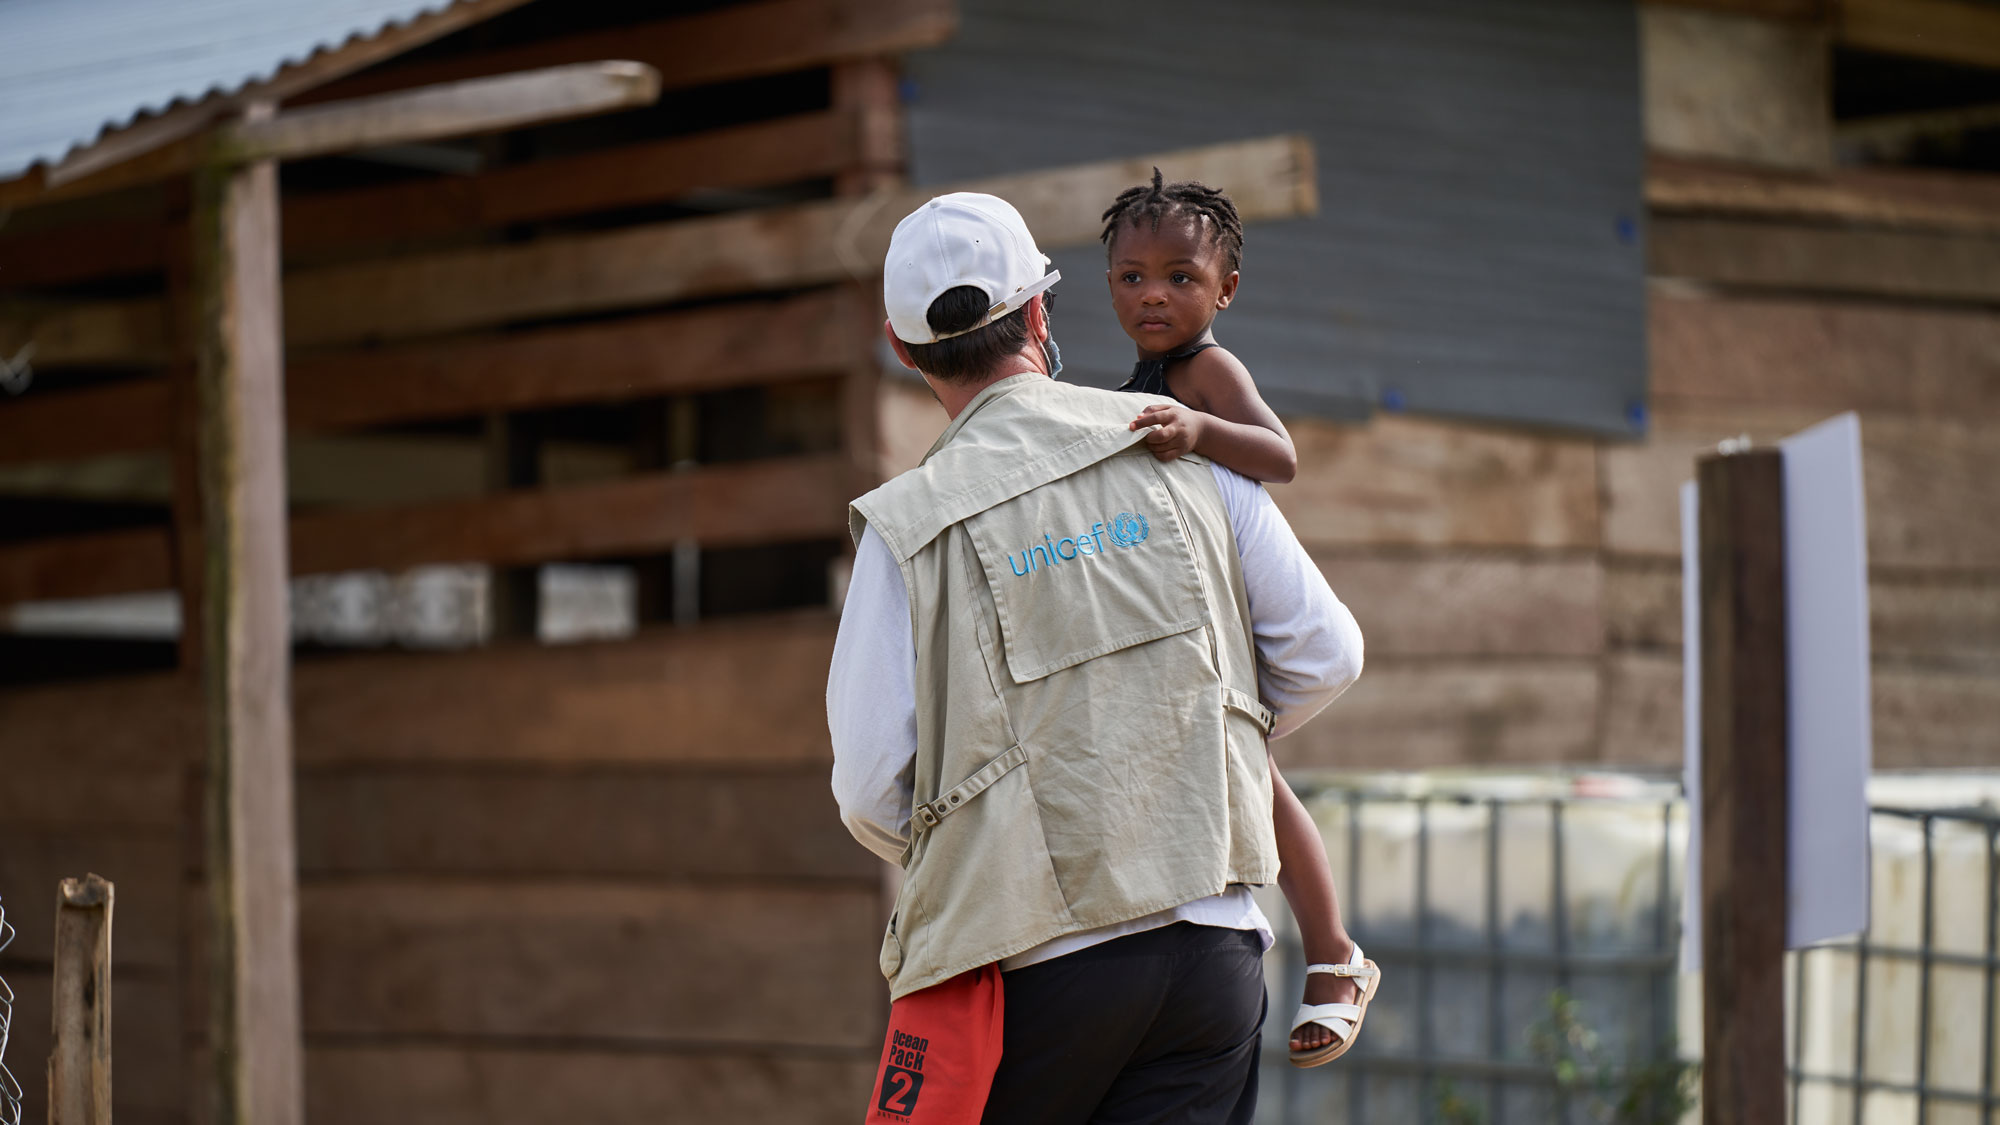 Alfonso F. Reca, UNICEF Regional Communications Specialist for UNICEF in Latin America and the Caribbean, carries a young girl who has just arrived with her mother in Bajo Chiquito, Darién, Panamá, after migrating through the dangerous Darién Gap.